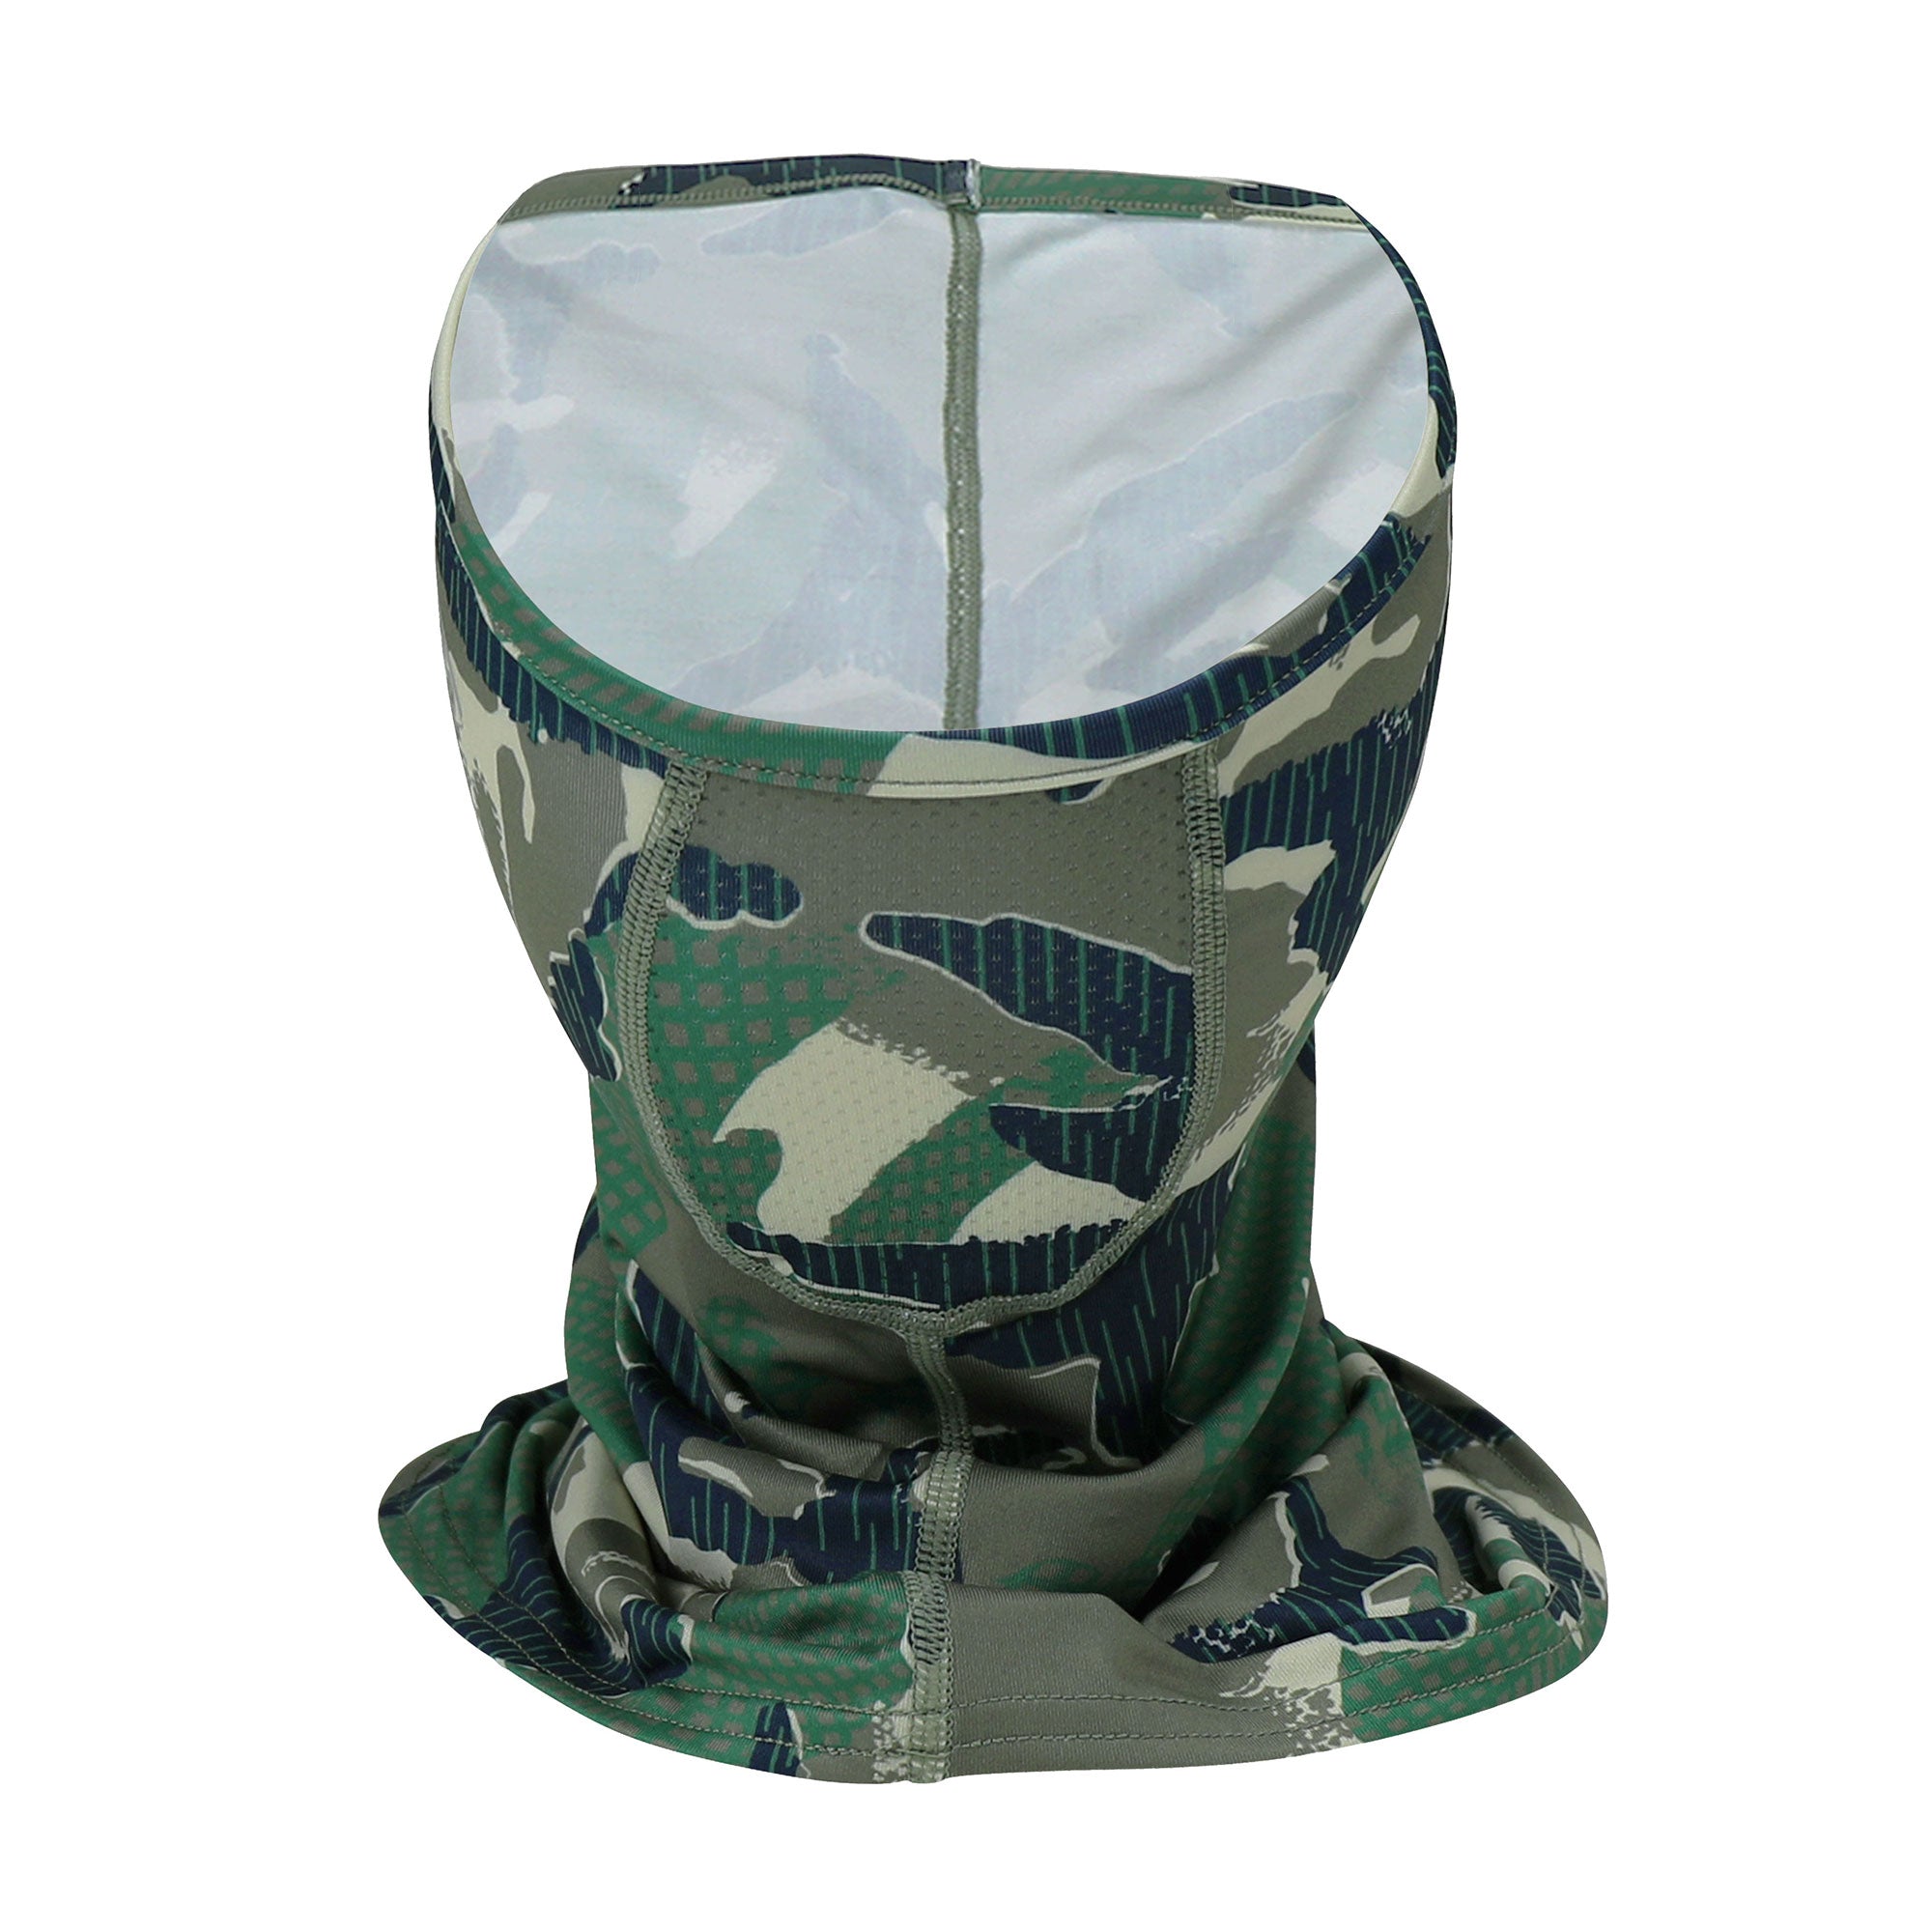 Is Camouflage Face Paint Necessary? - The R&K Hunting Company